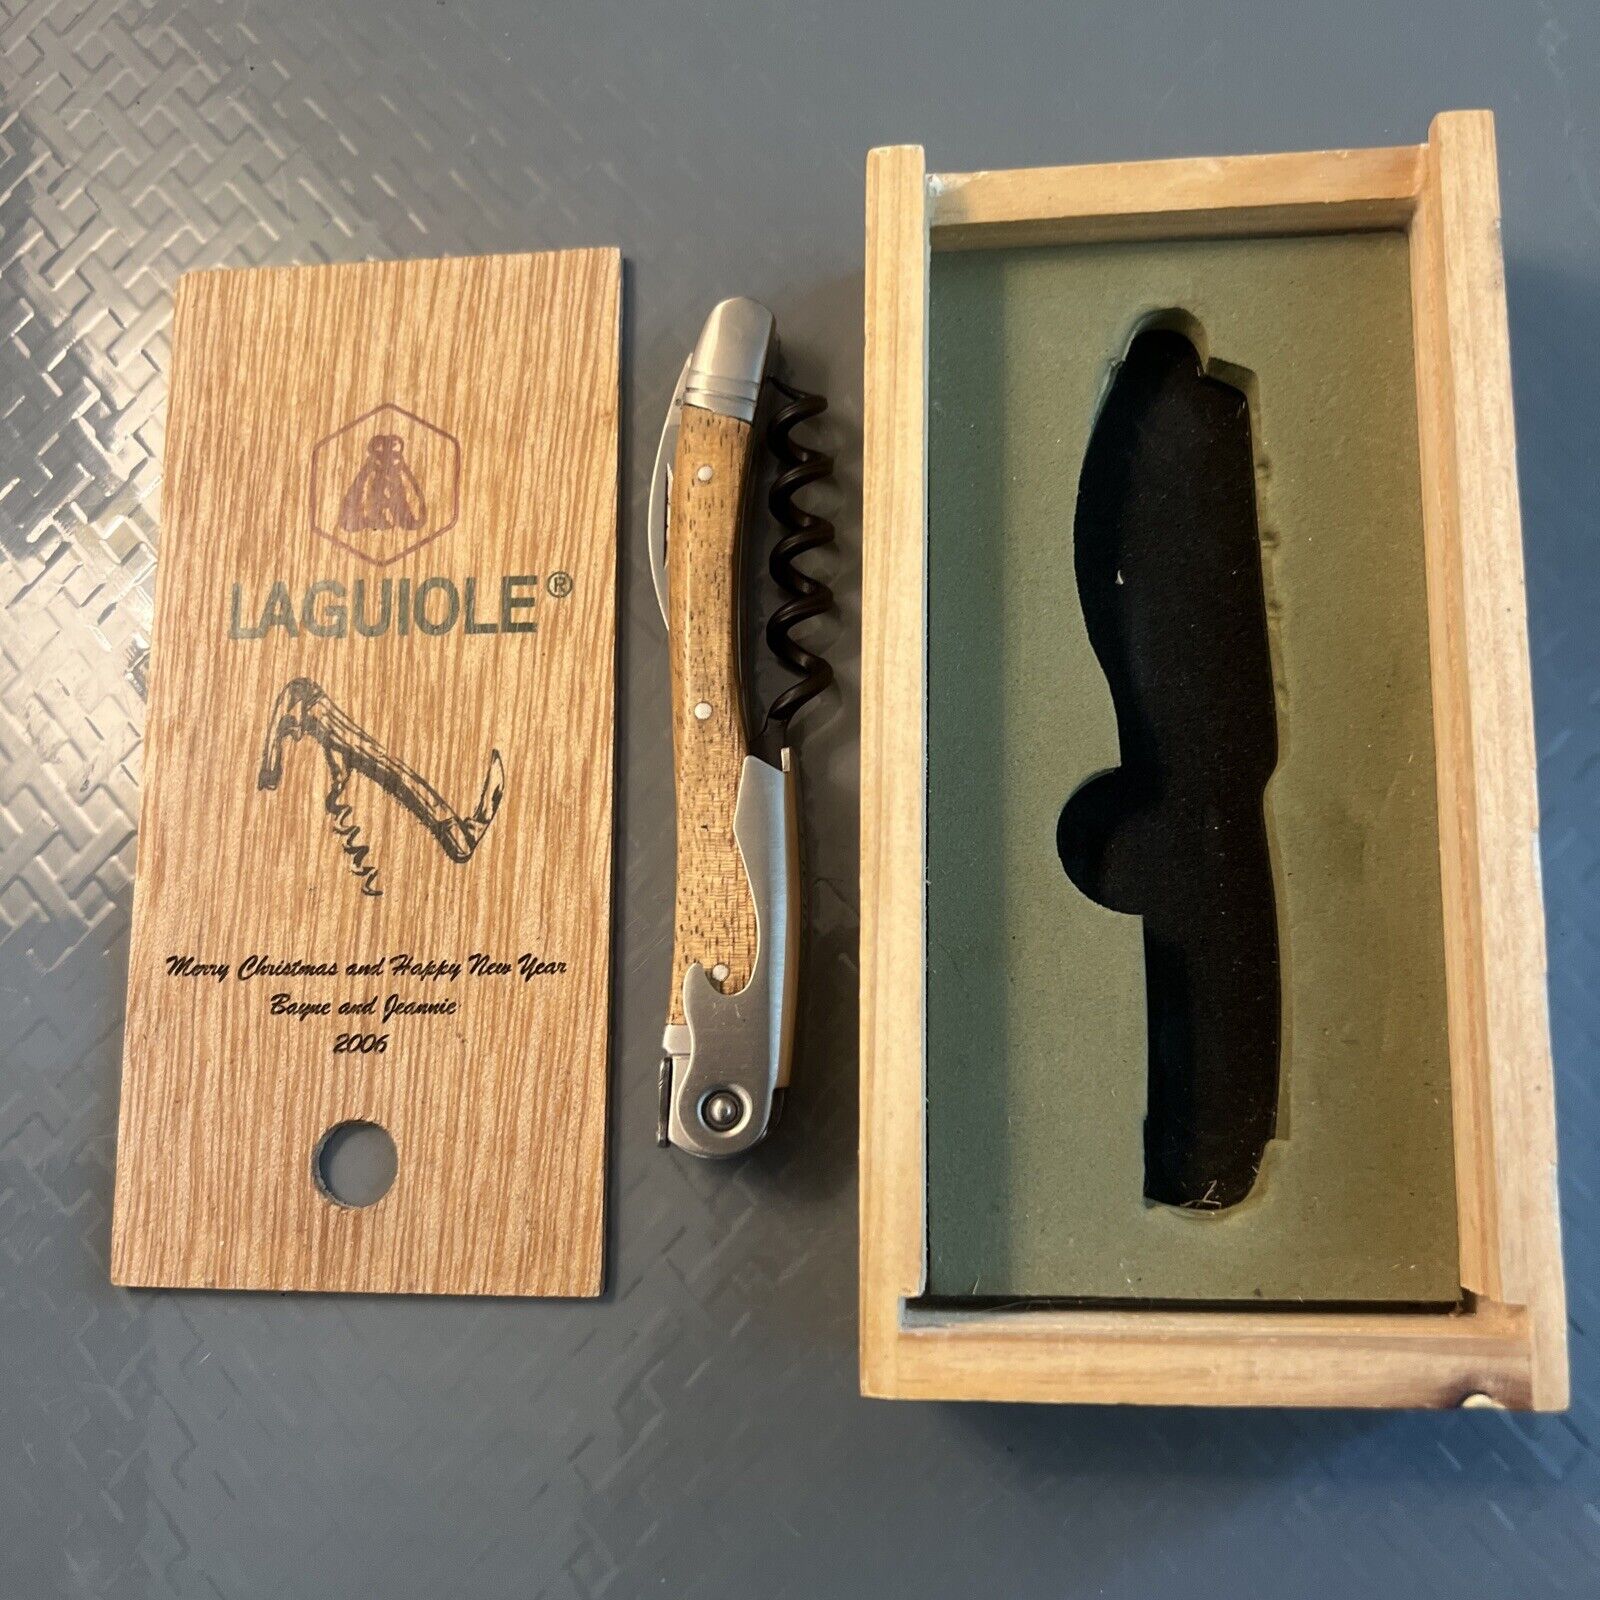 Laguiole Corkscrew with Walnut Wood Handles Vintage Style 2006 Edition